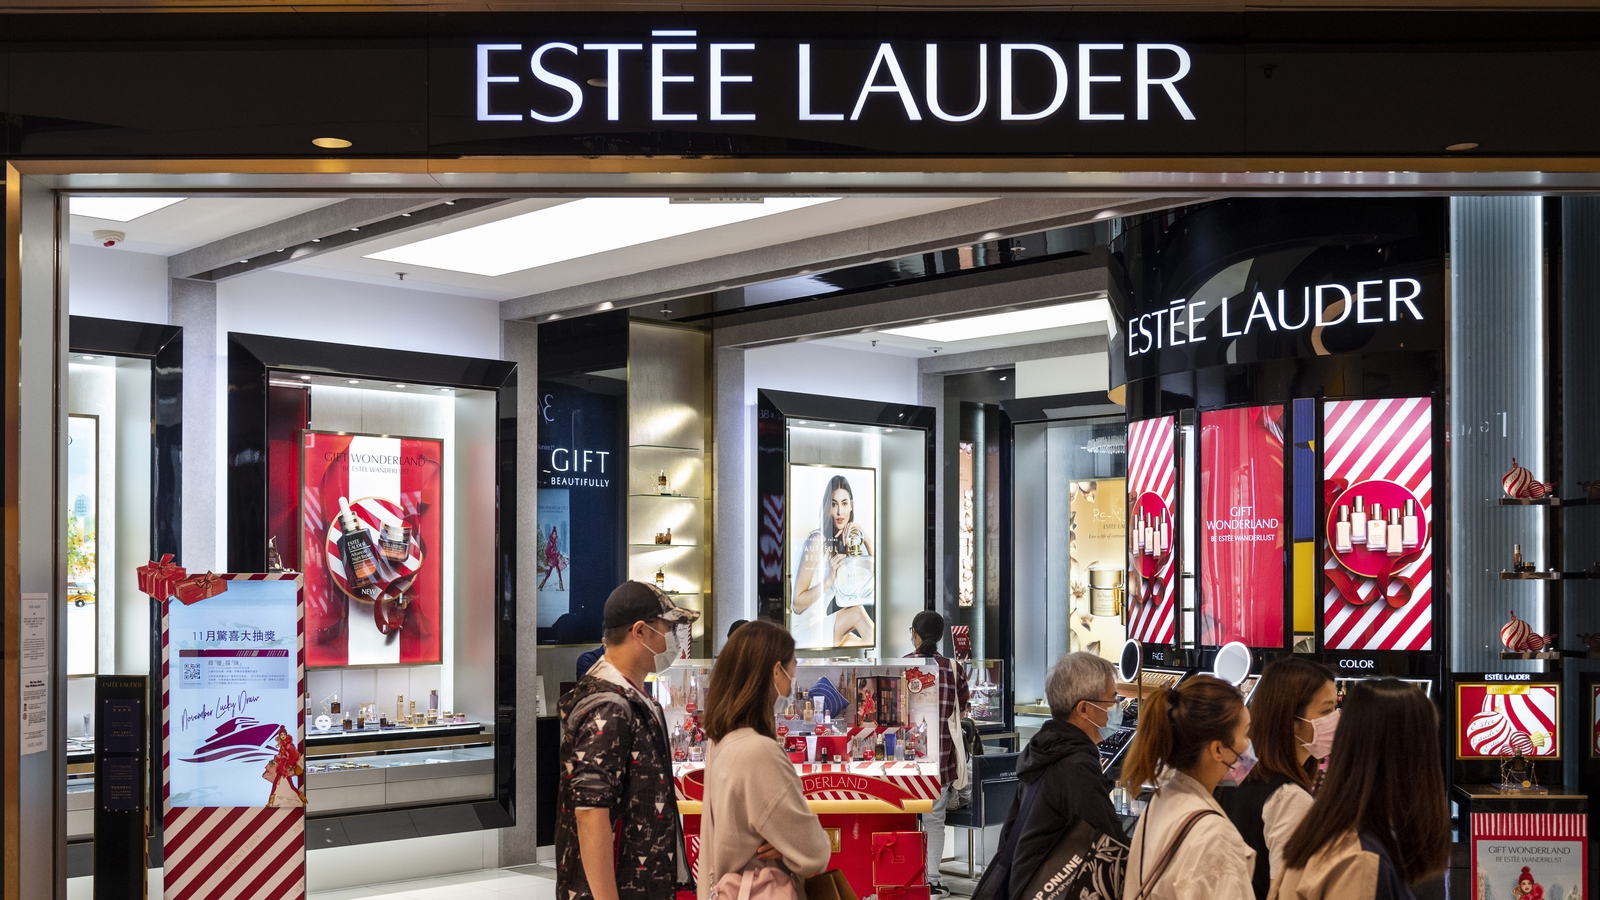 Estee Lauder sees weak annual profit on slow recovery in Asia travel retail